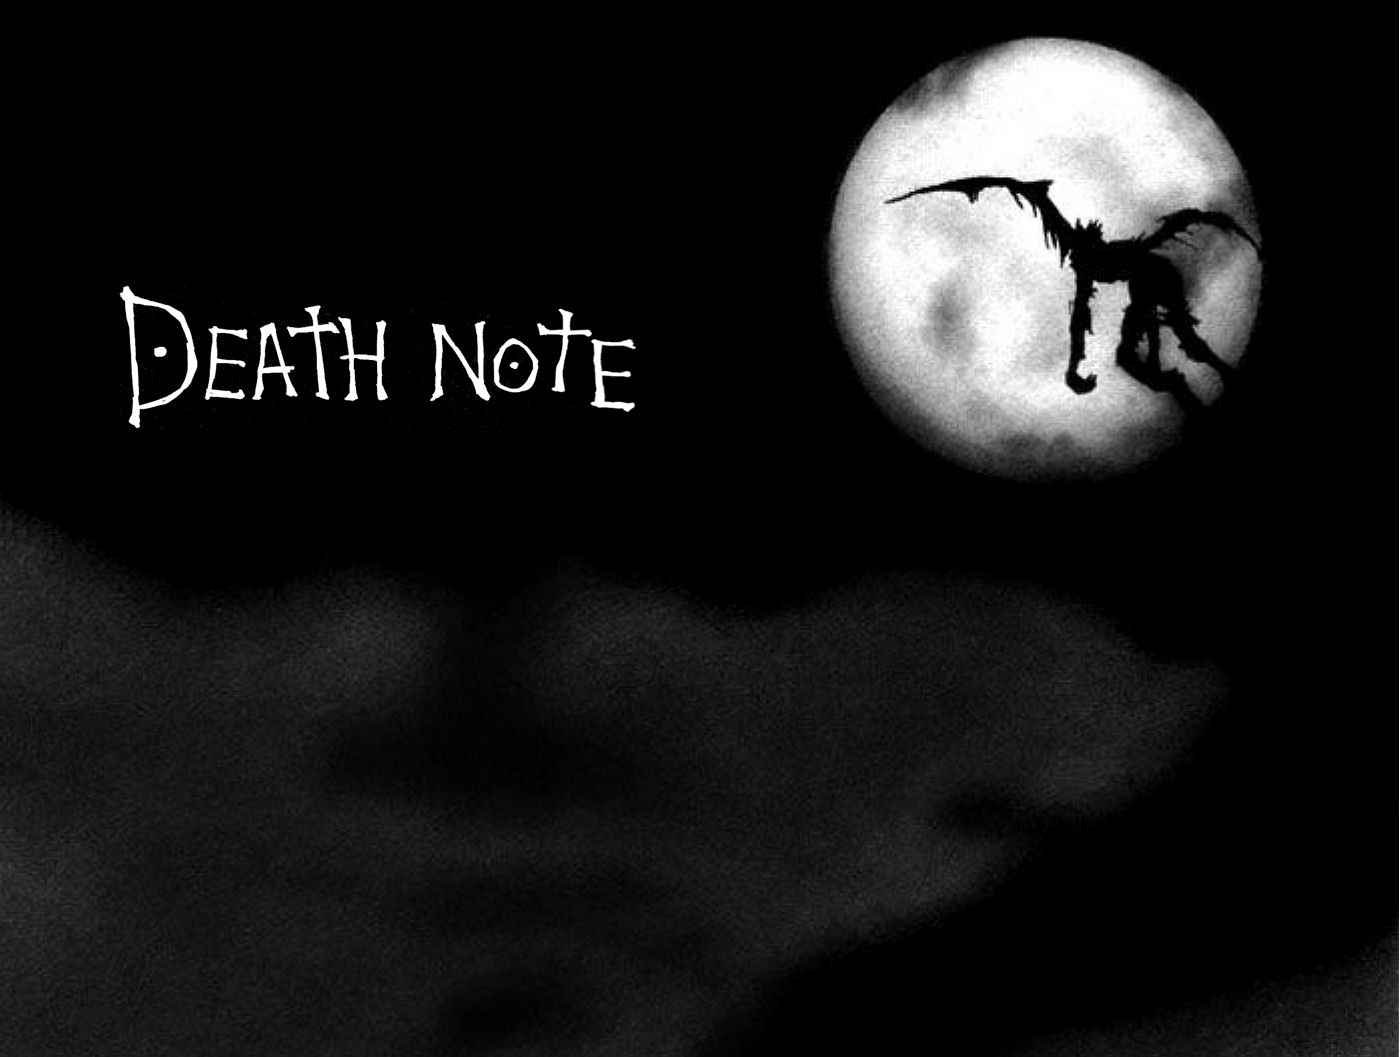 death note, anime cell phone wallpapers